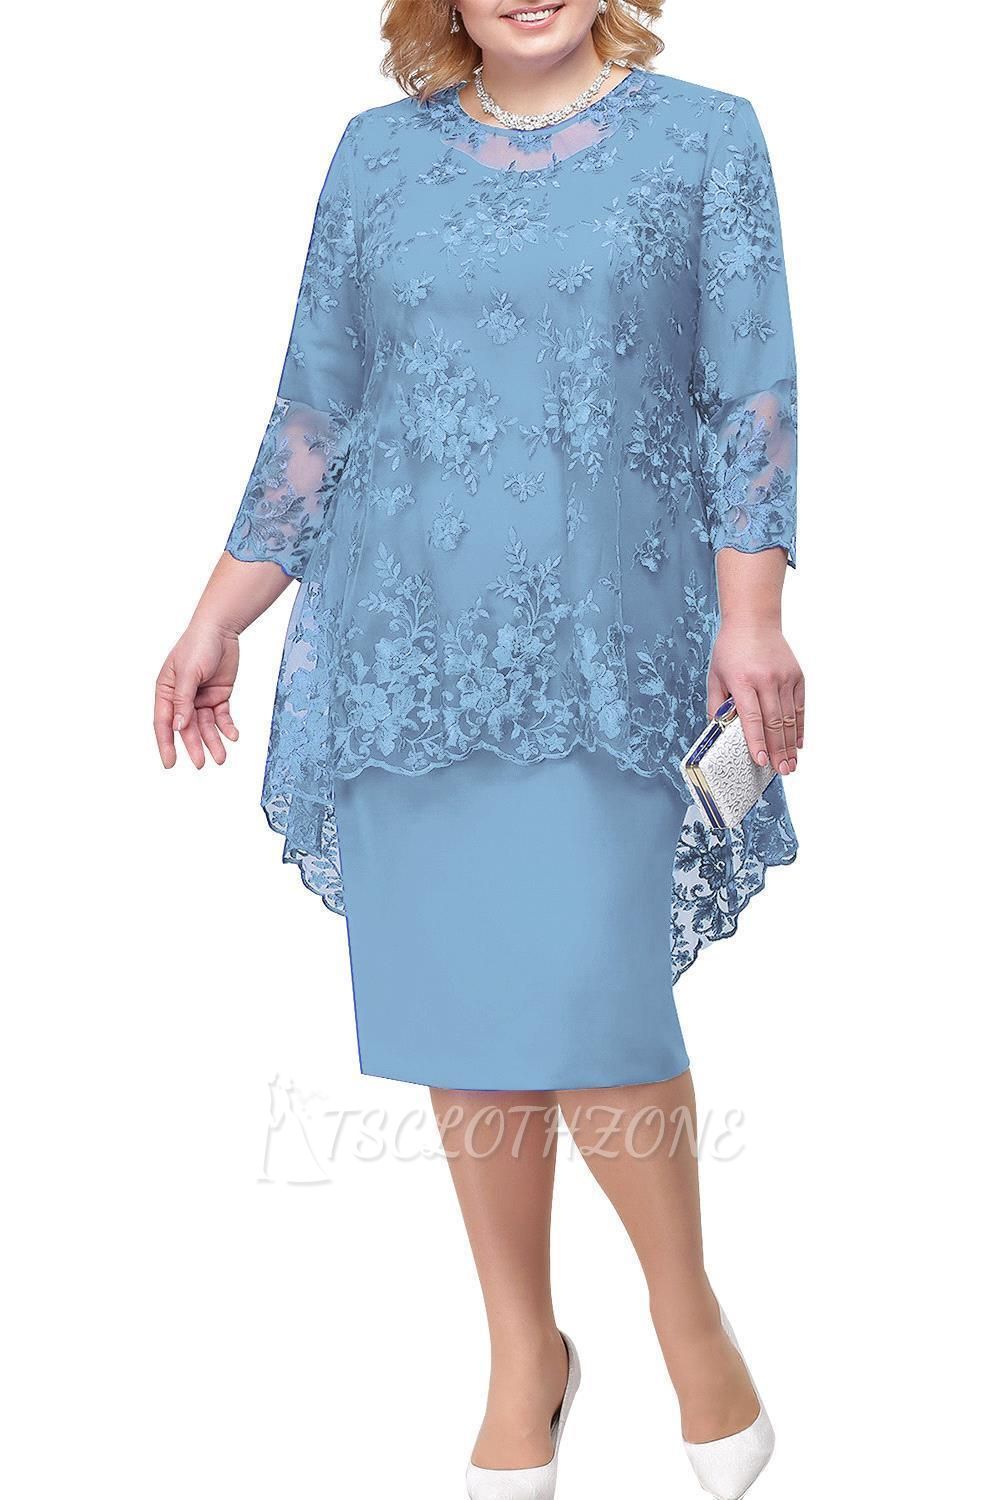 Tulle Lace 3/4 Sleeves Knee Length Mother of Bride Dress | Mother Wedding Party Dress